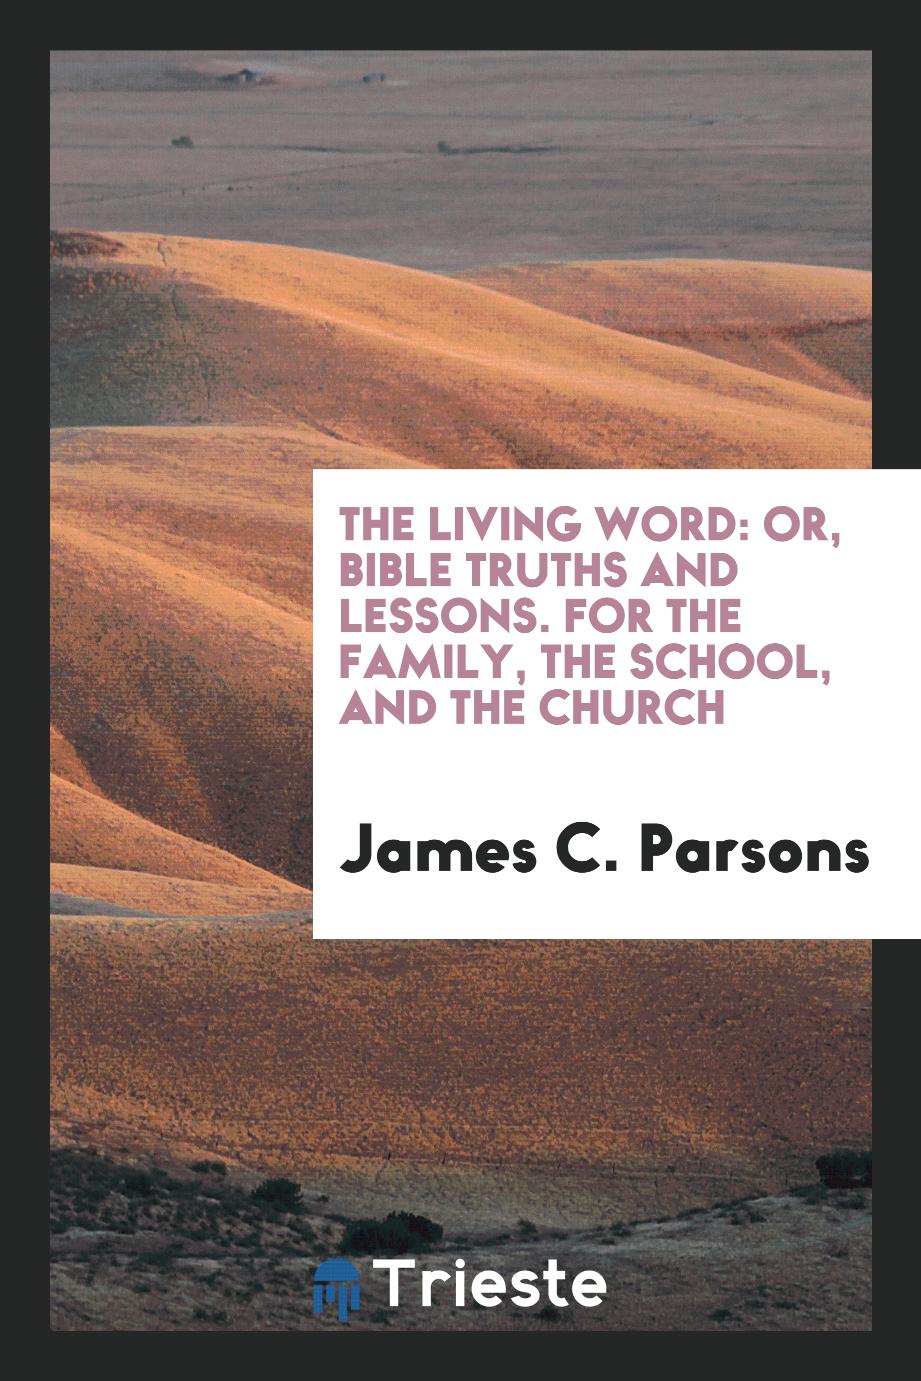 The Living Word: Or, Bible Truths and Lessons. For the Family, the School, and the Church